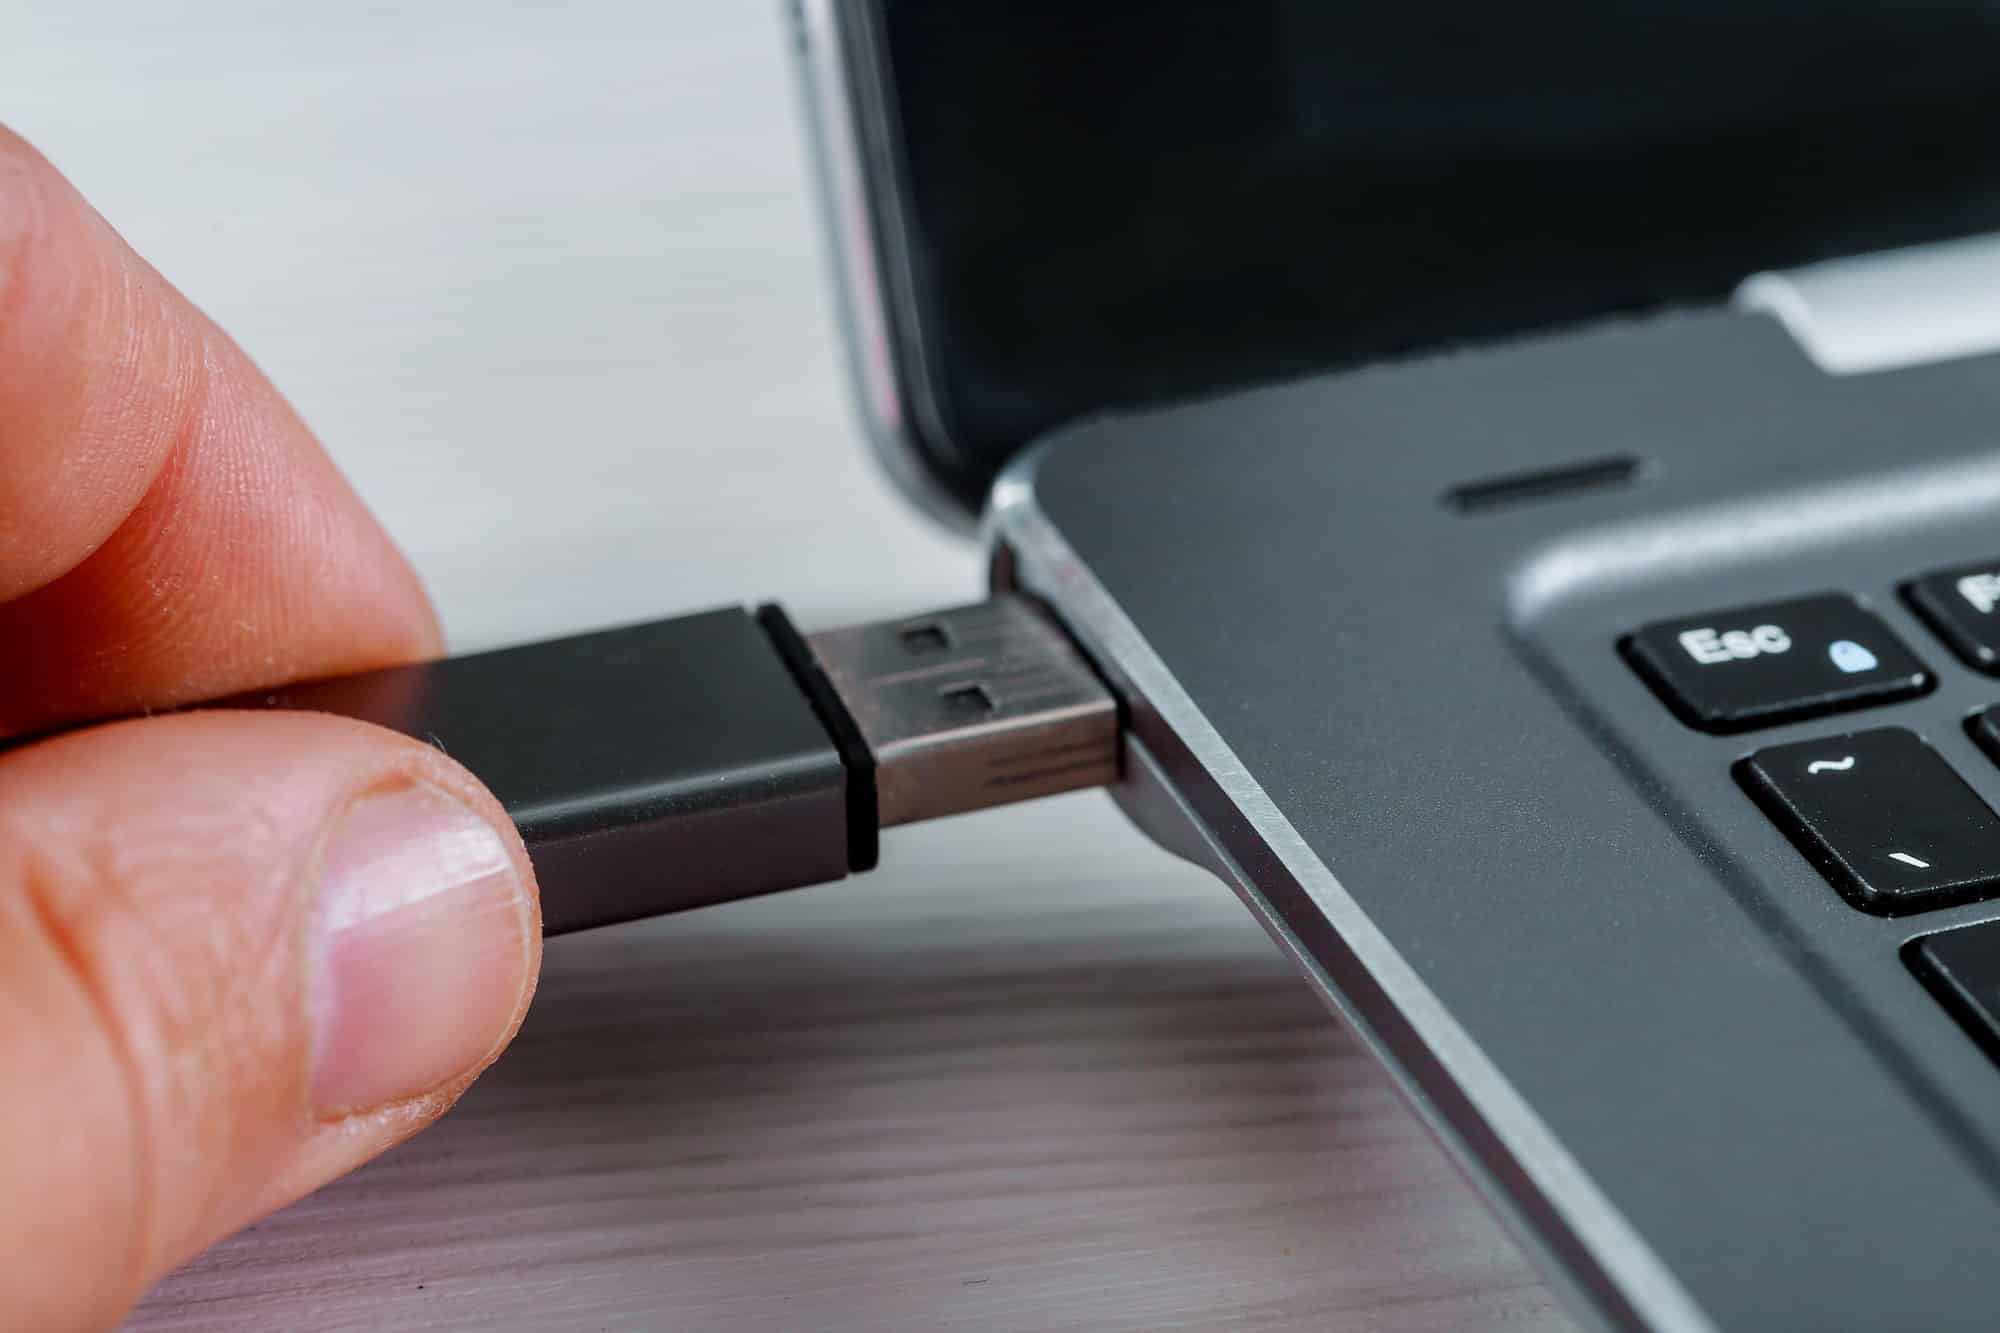 Data Recovery From Flash Drives: An In-Depth Look At Flash Drive Recovery Tools